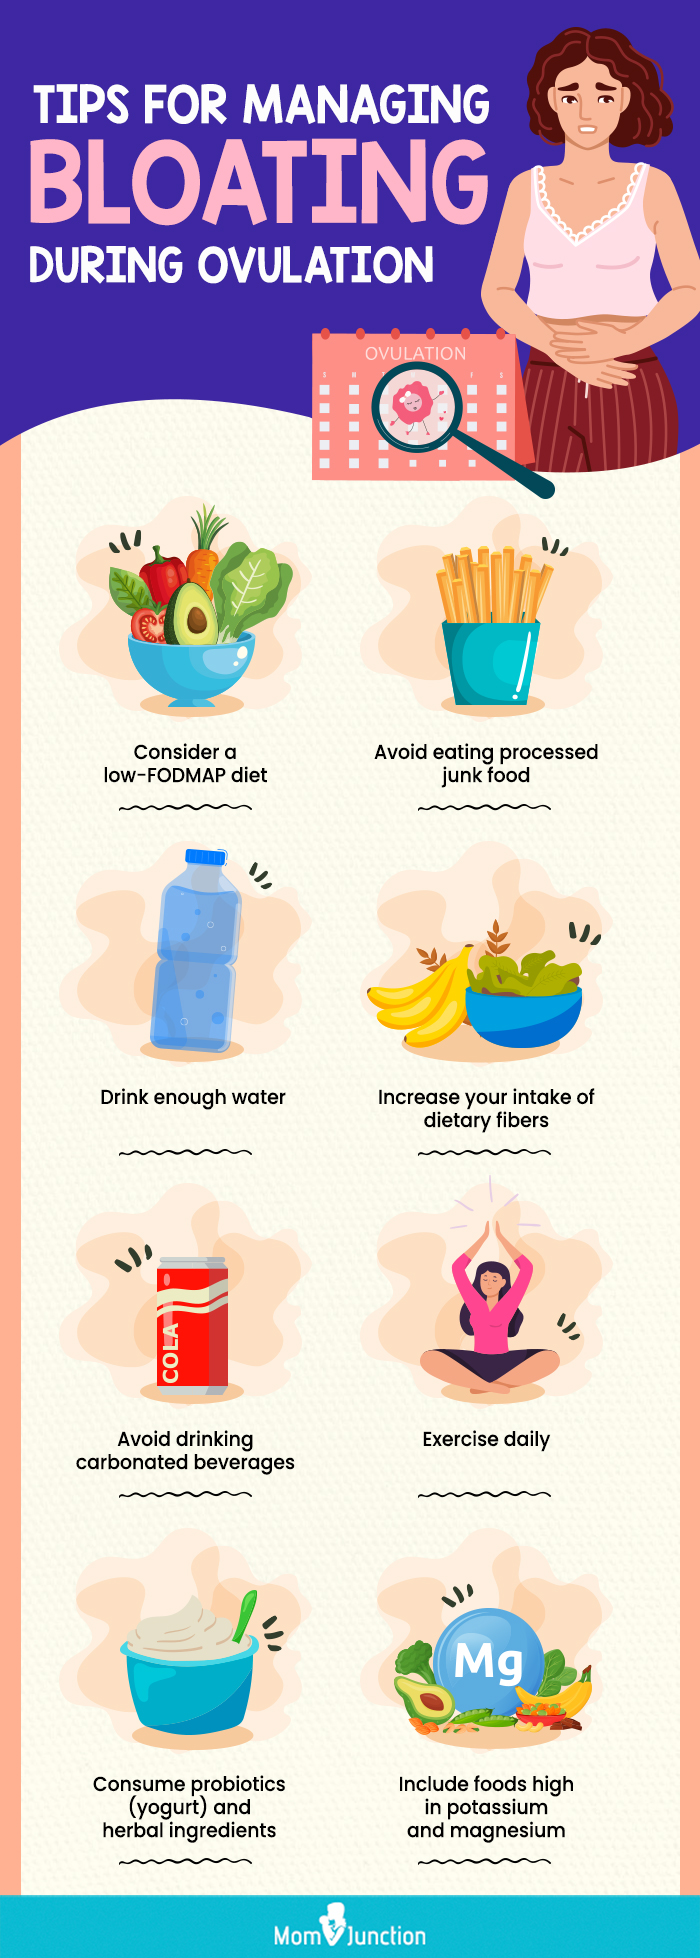 tips for managing bloating during ovulation [infographic]